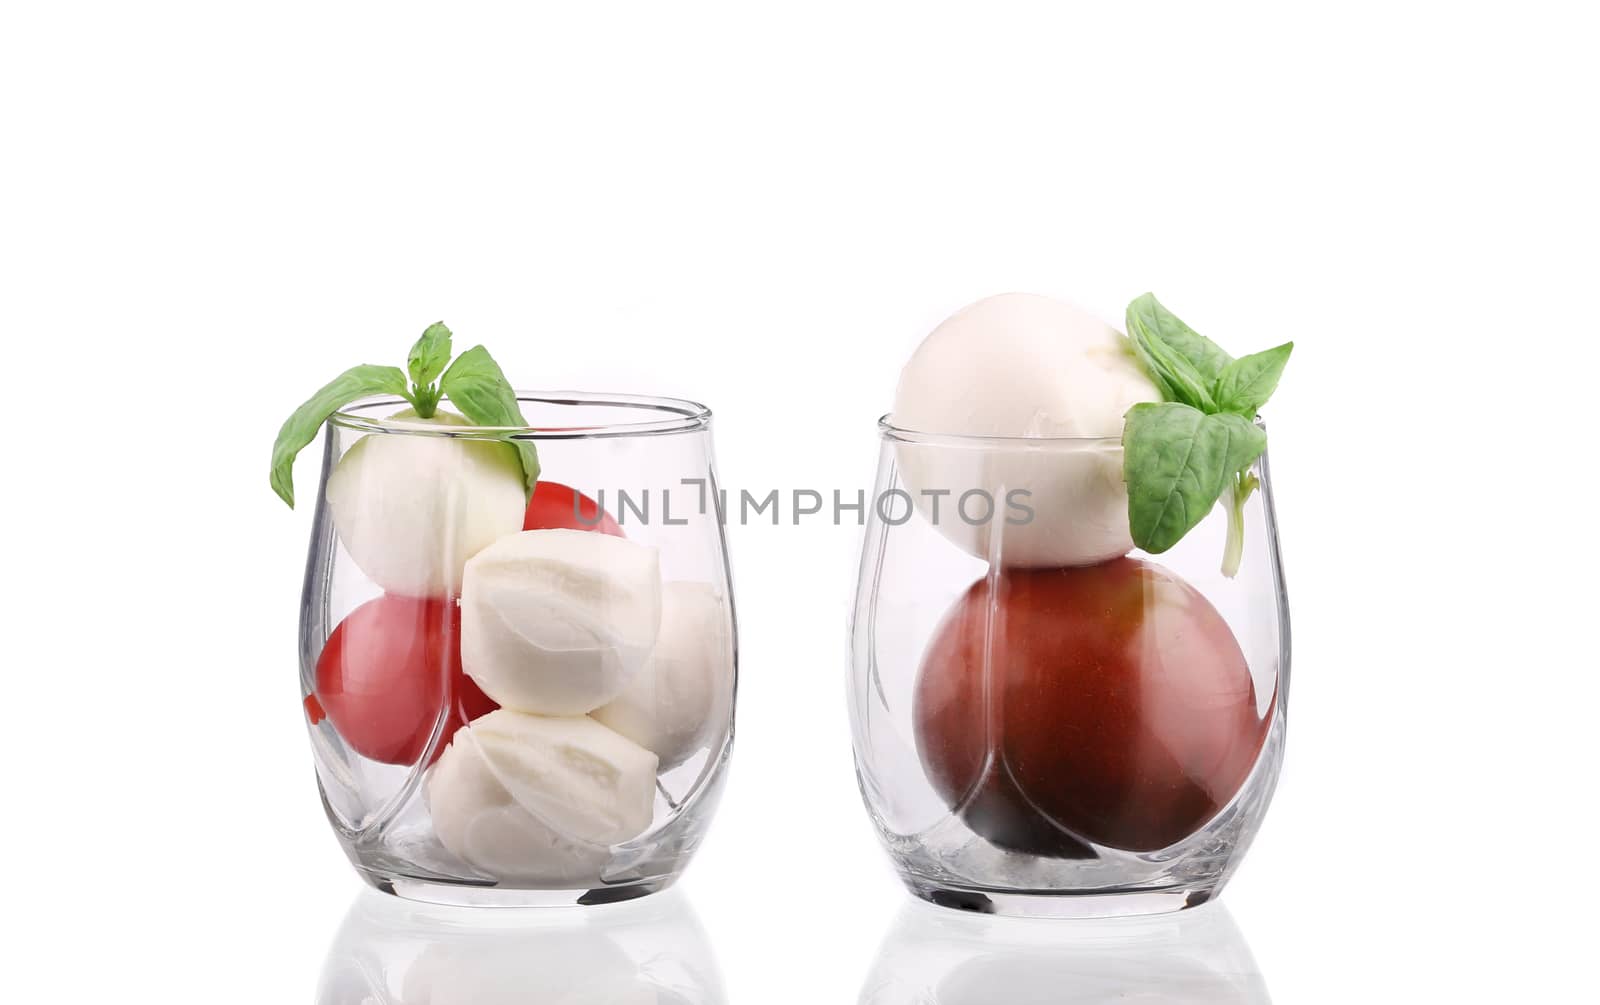 Tomatoes and mozzarella balls in glass. Isolated on a white background.